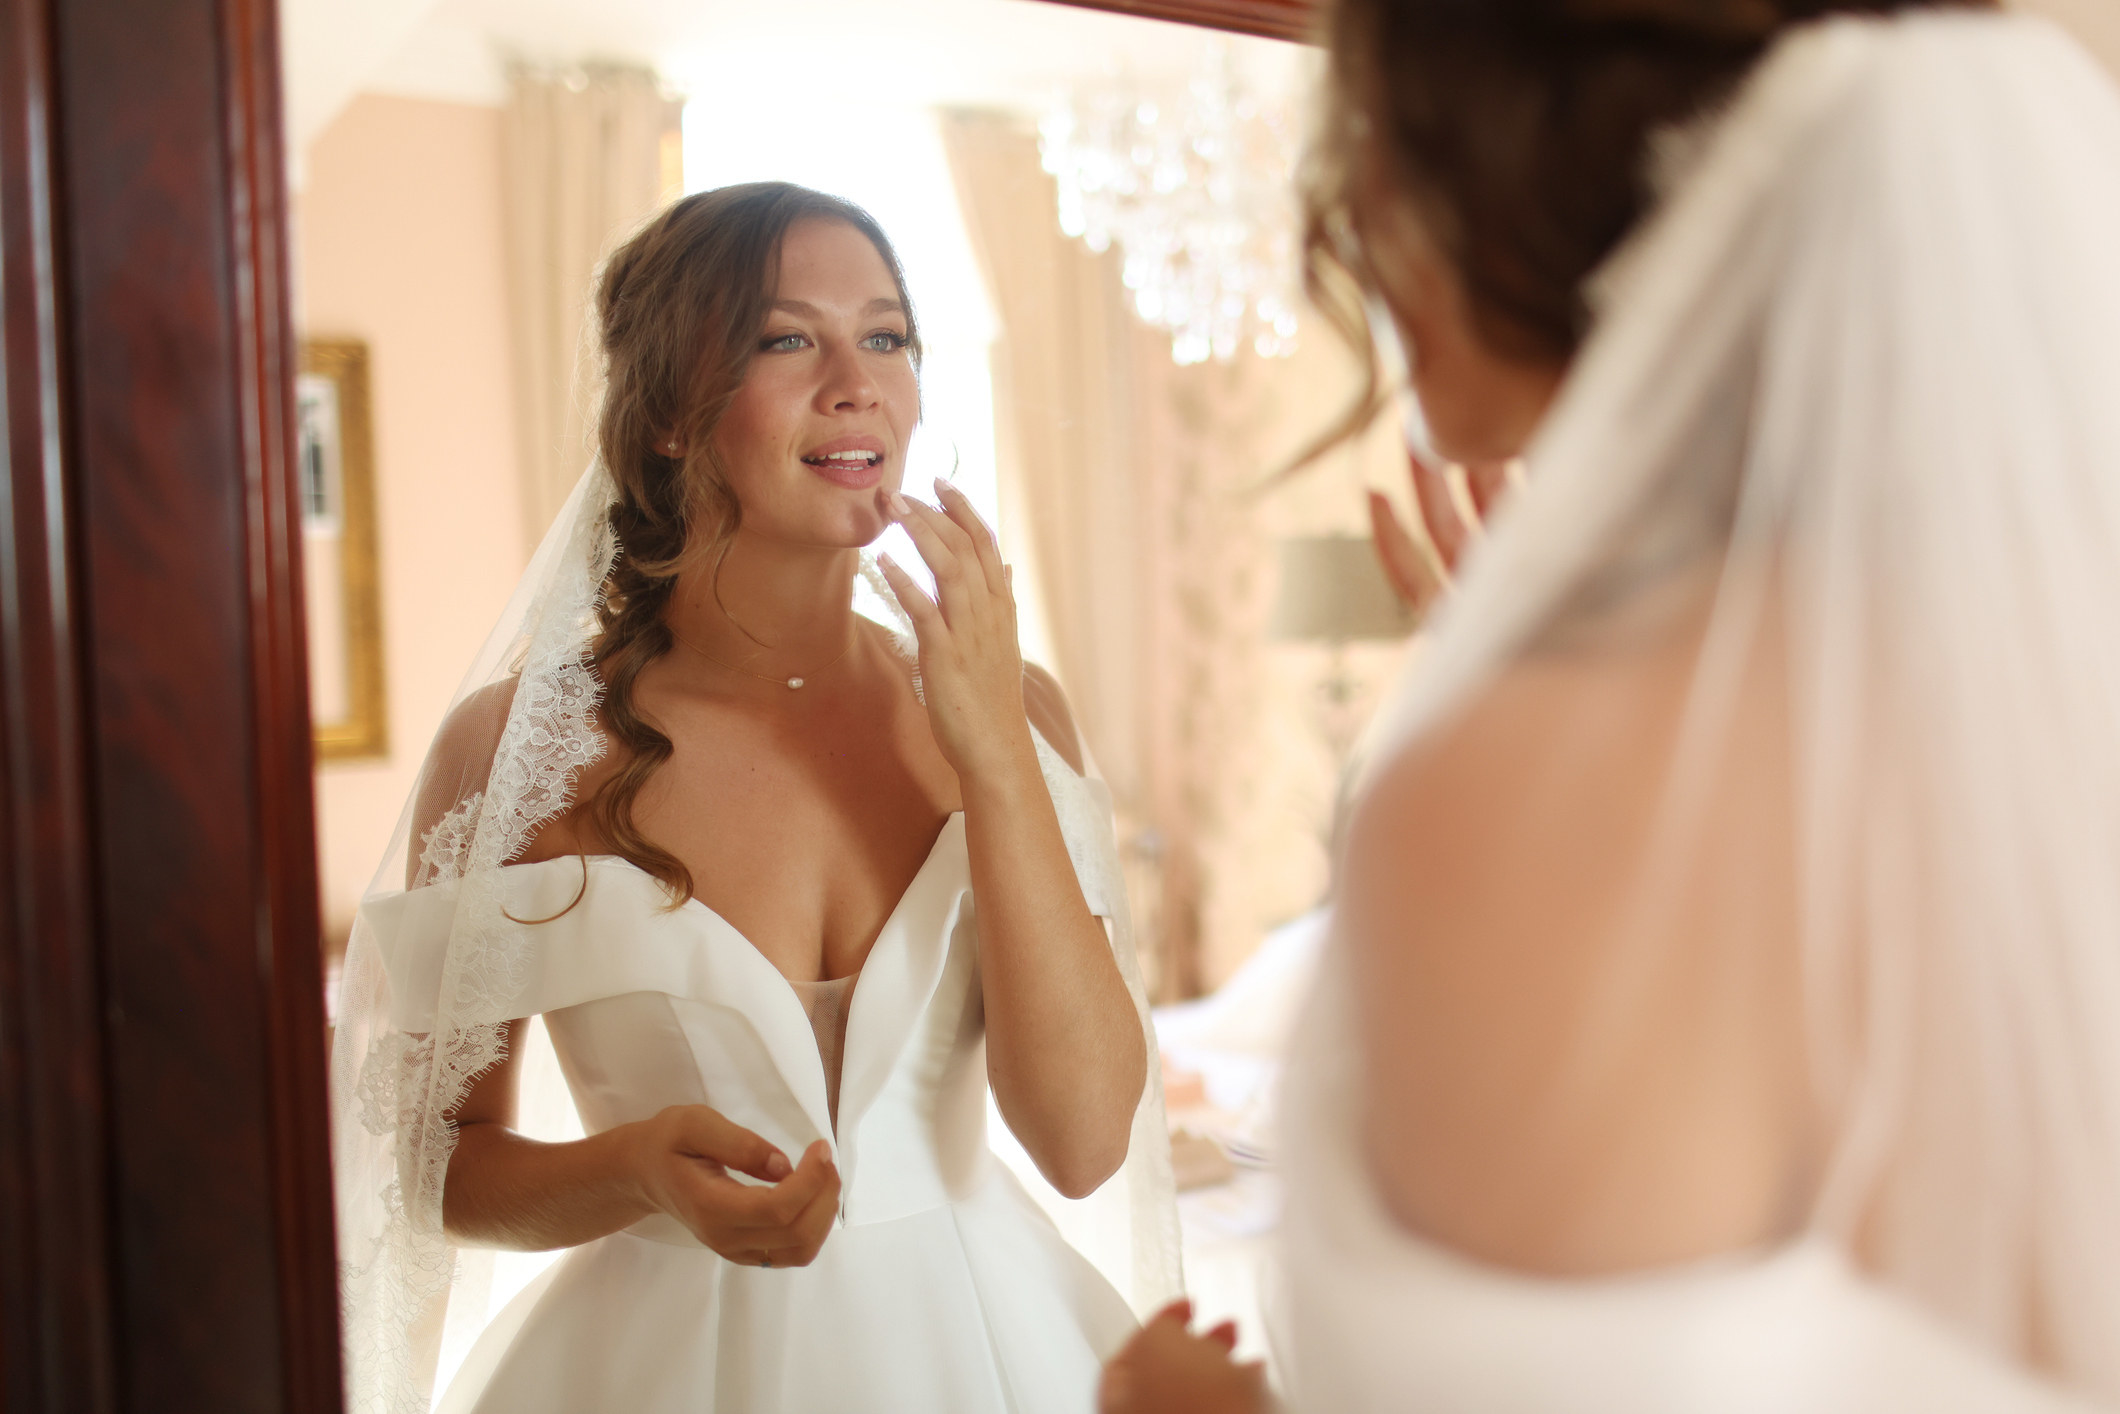 A bride looks in the mirror and fixes her lipstick